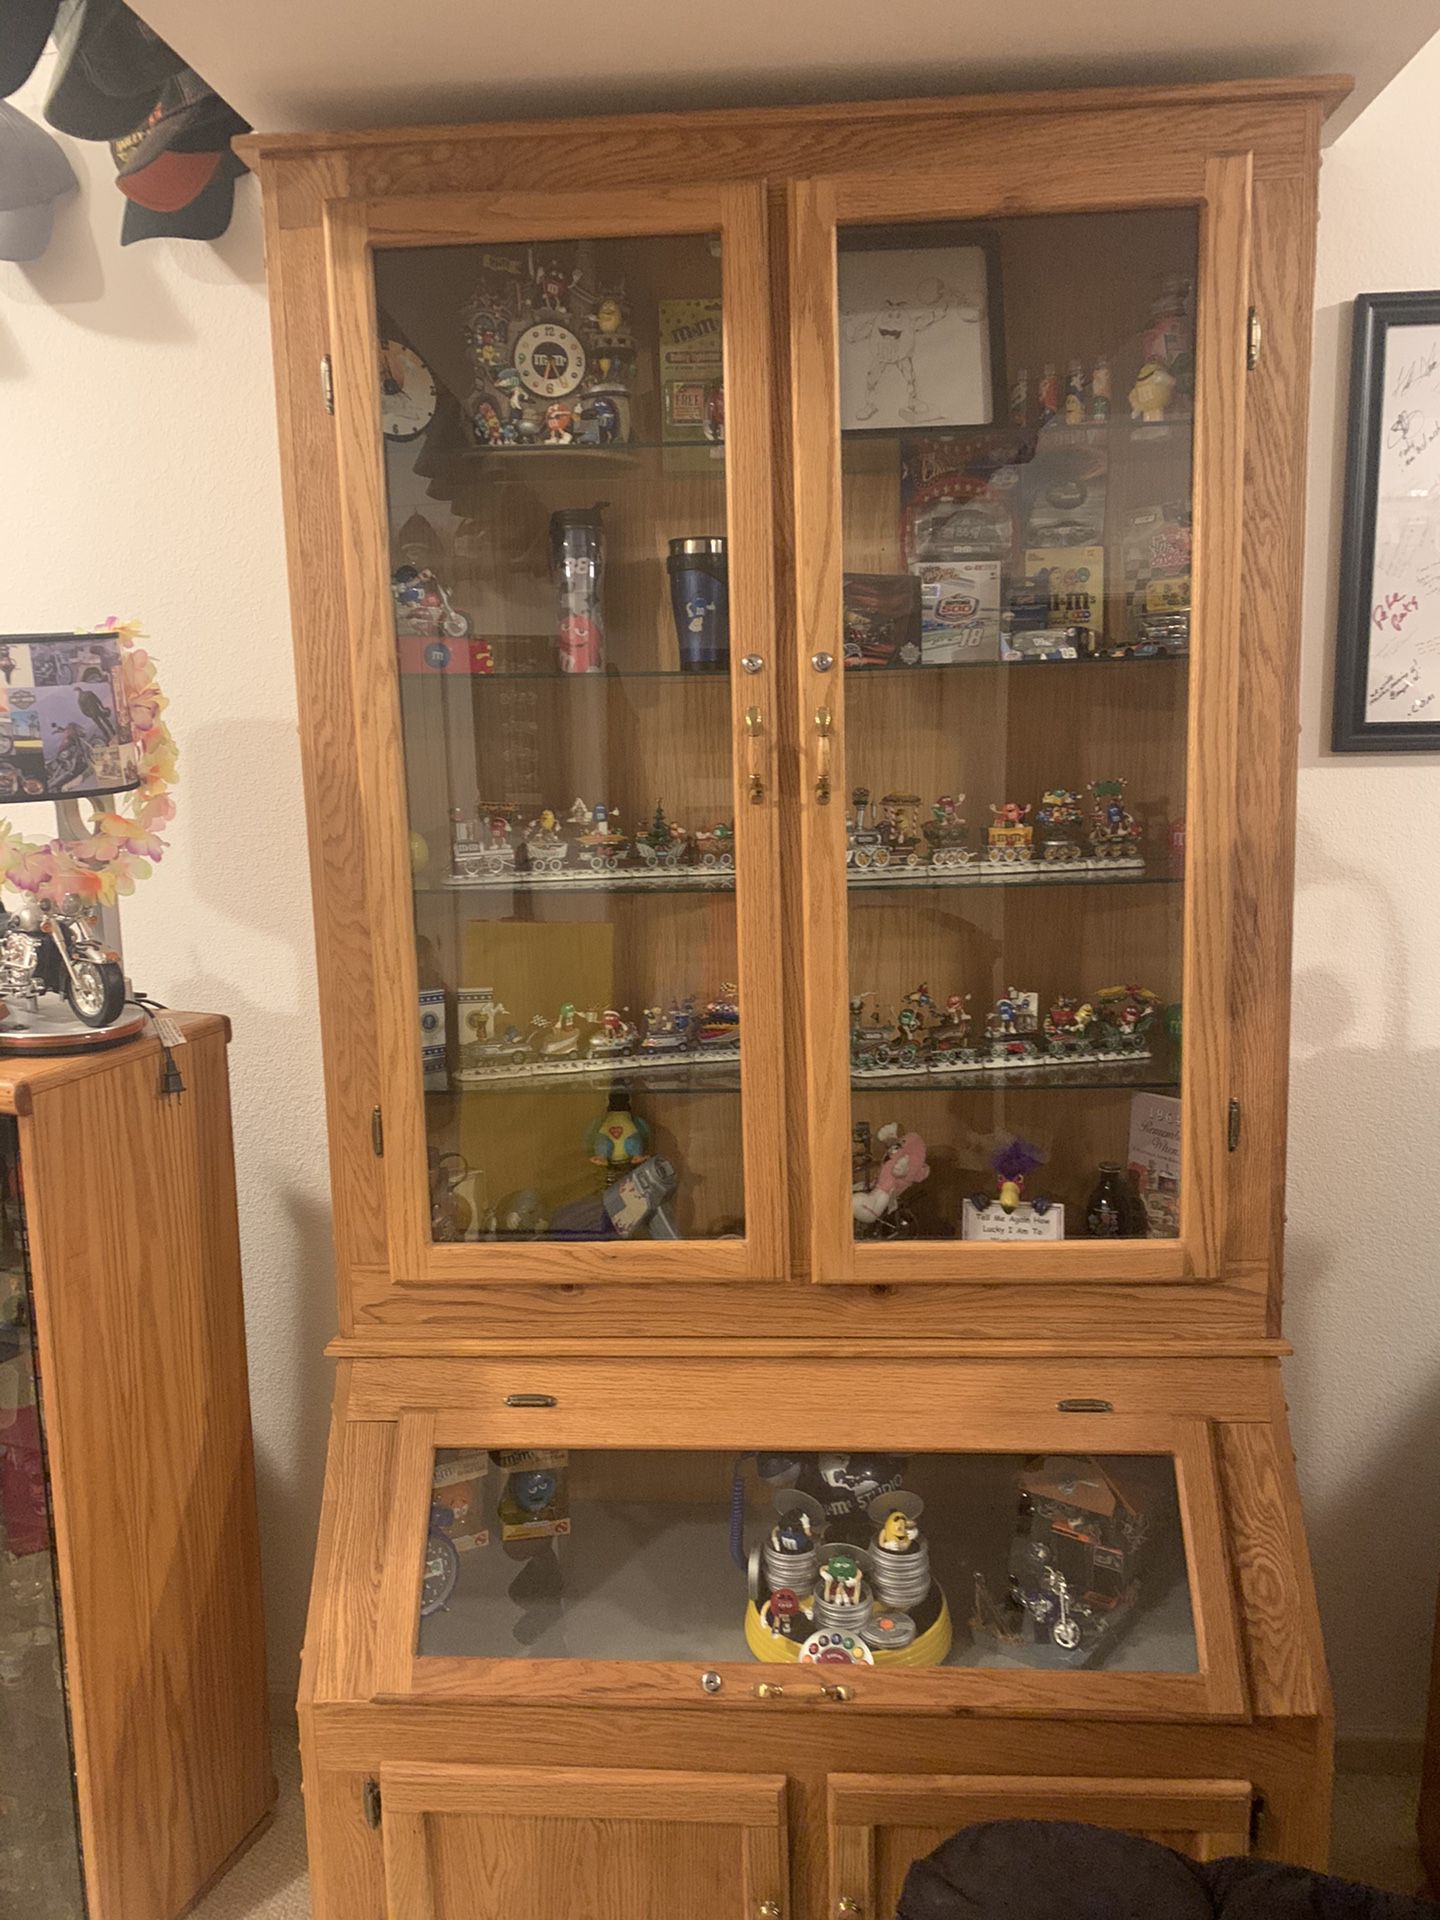 Gun cabinet converted into a decorative stand with glass shelves